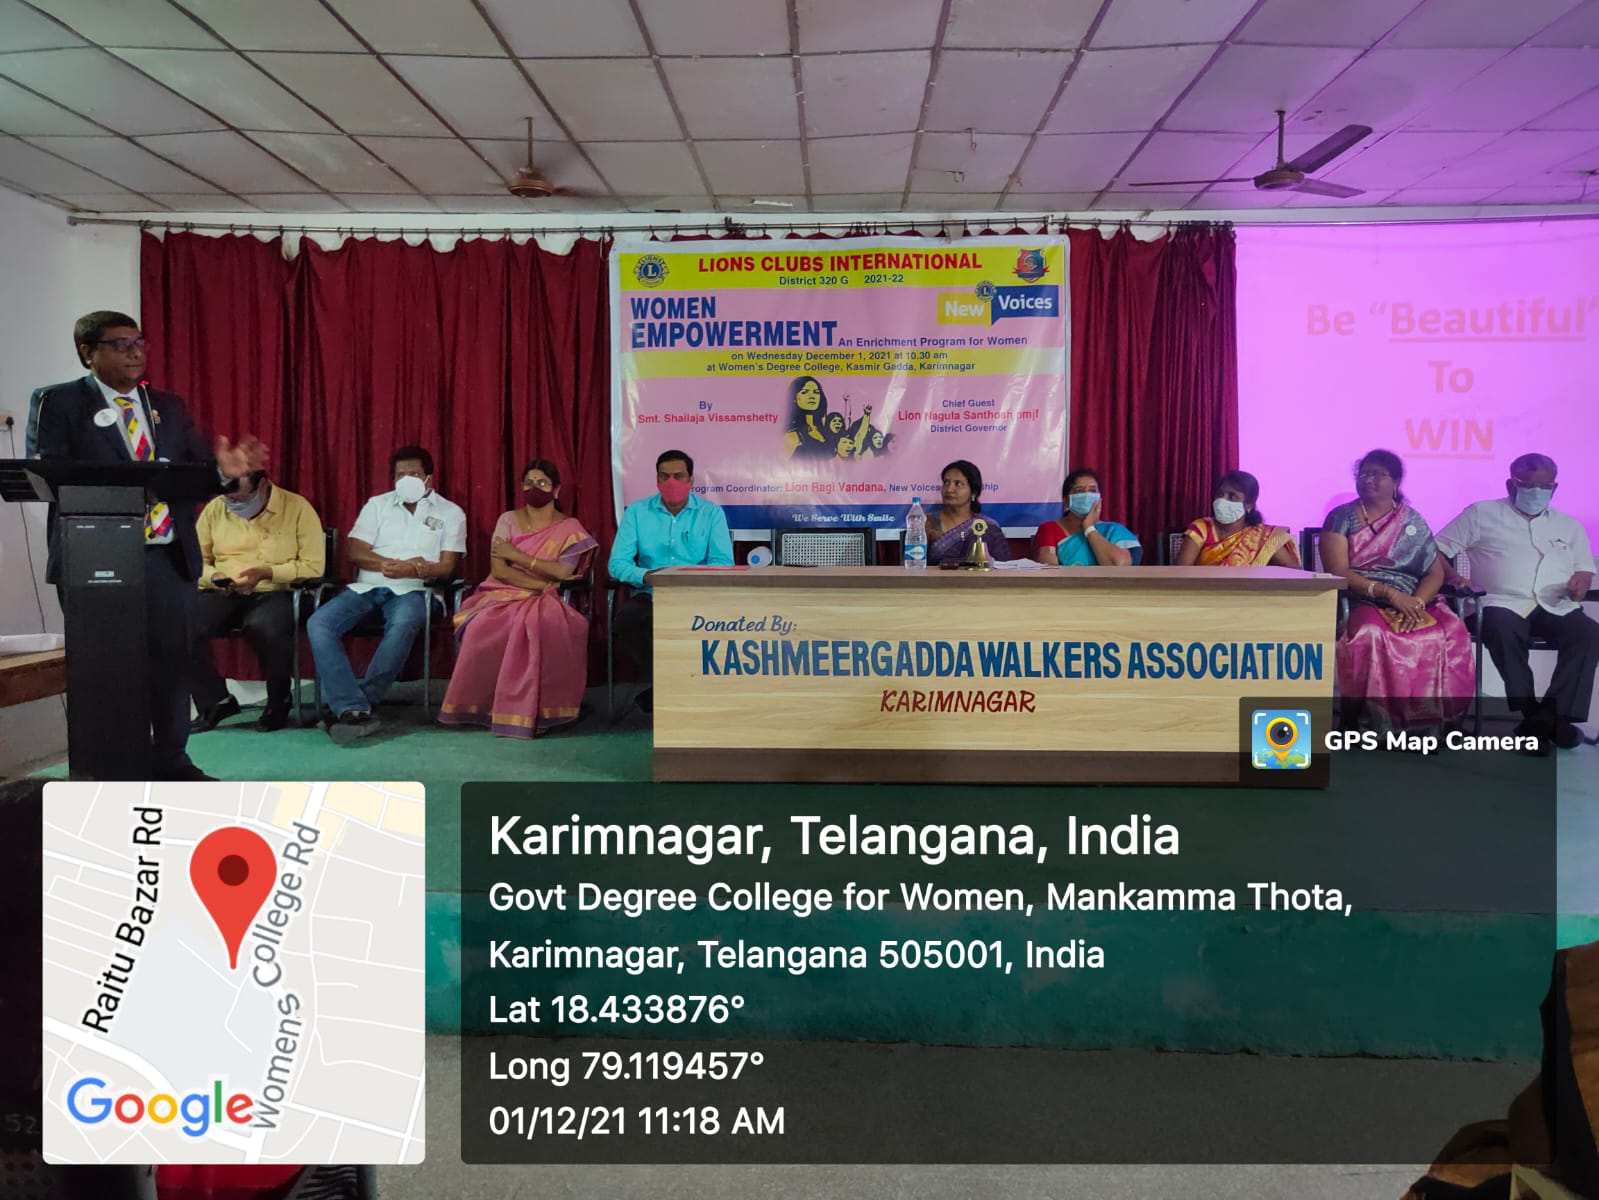  Self Development ", organised by IQAC, in collaboration with Lions Club